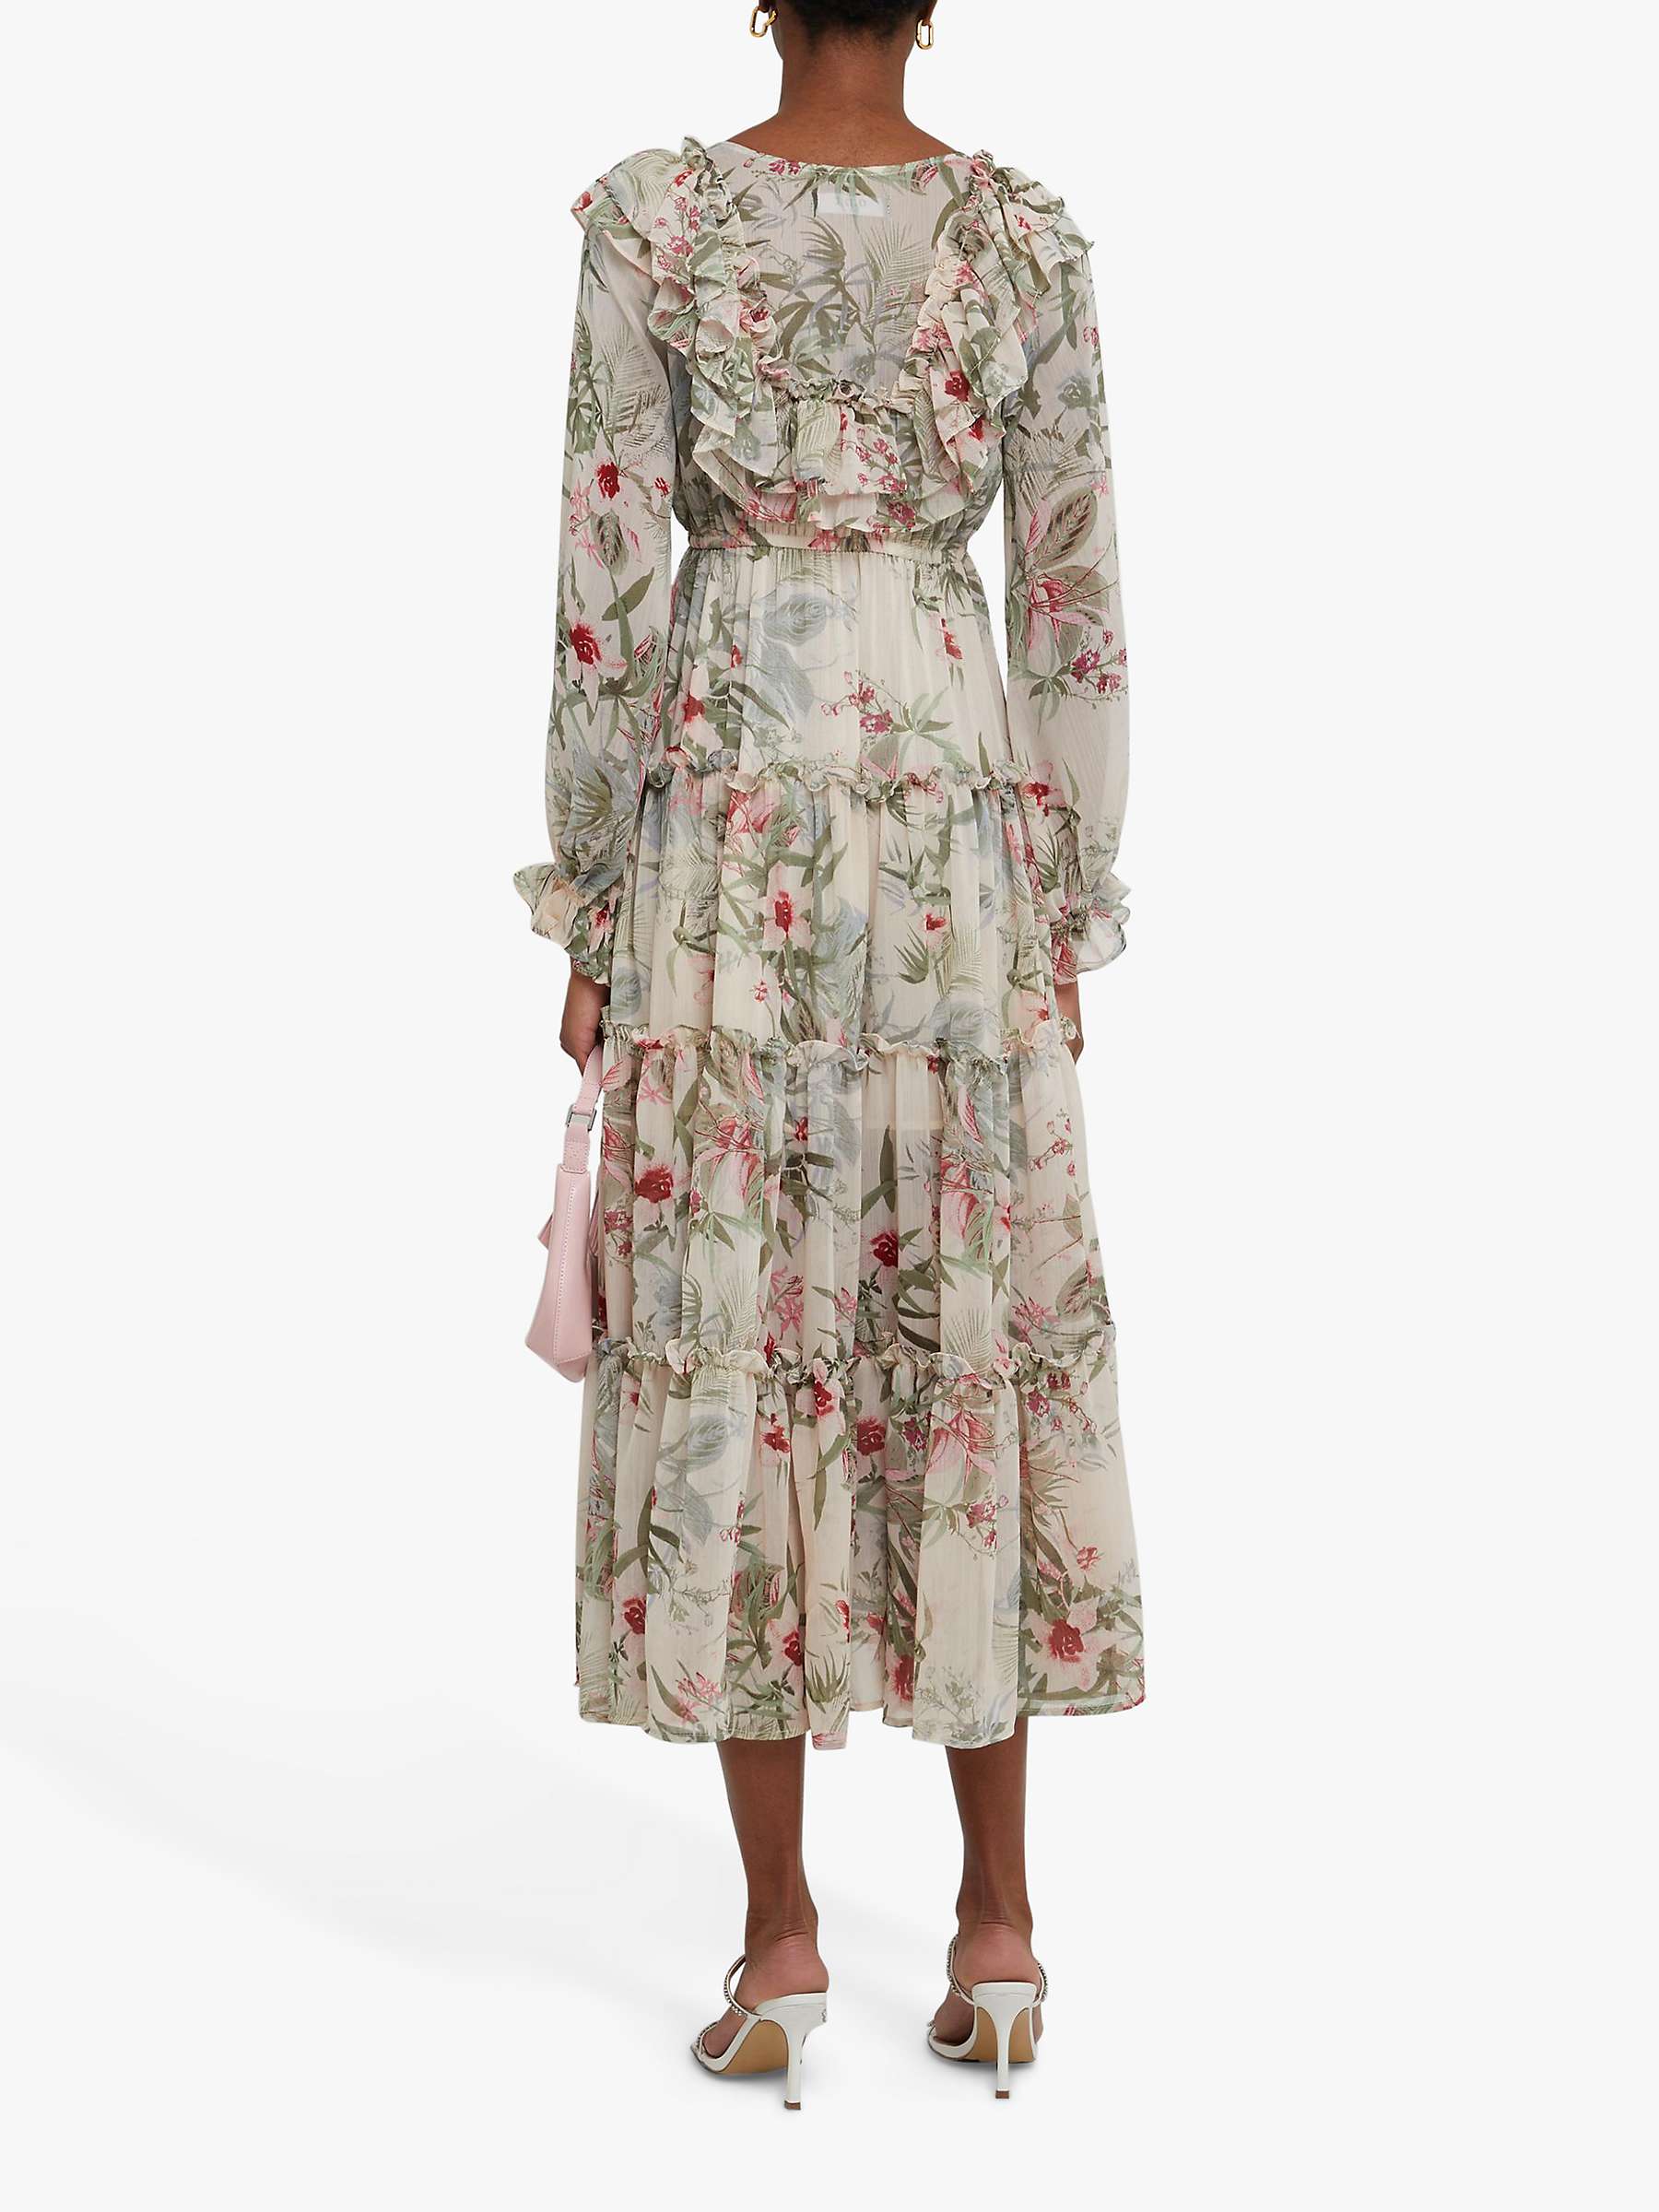 Buy o.p.t Indria Floral Print Tiered Dress, Green/Multi Online at johnlewis.com